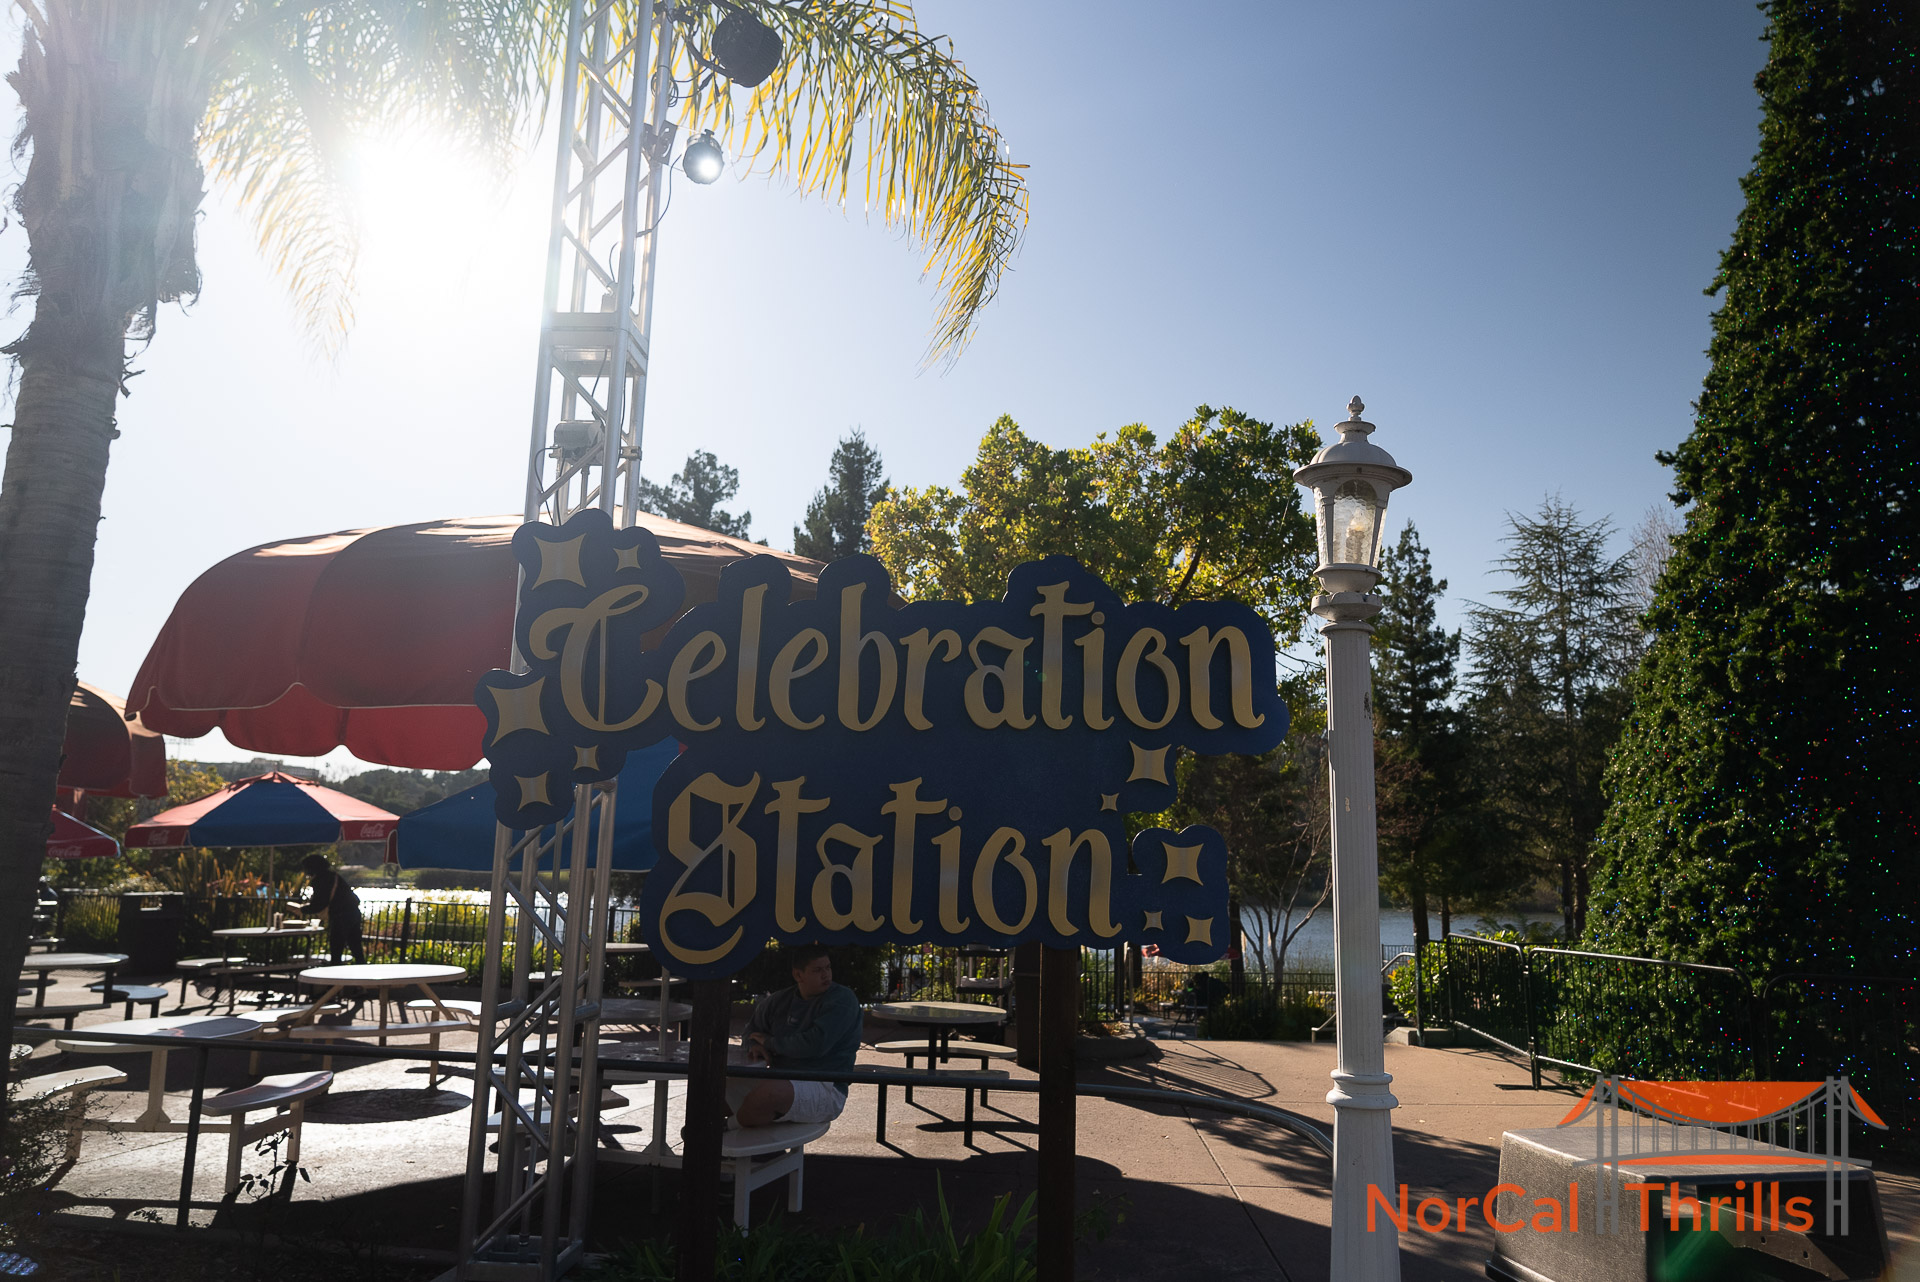 Holiday in the Park | Celebration Station